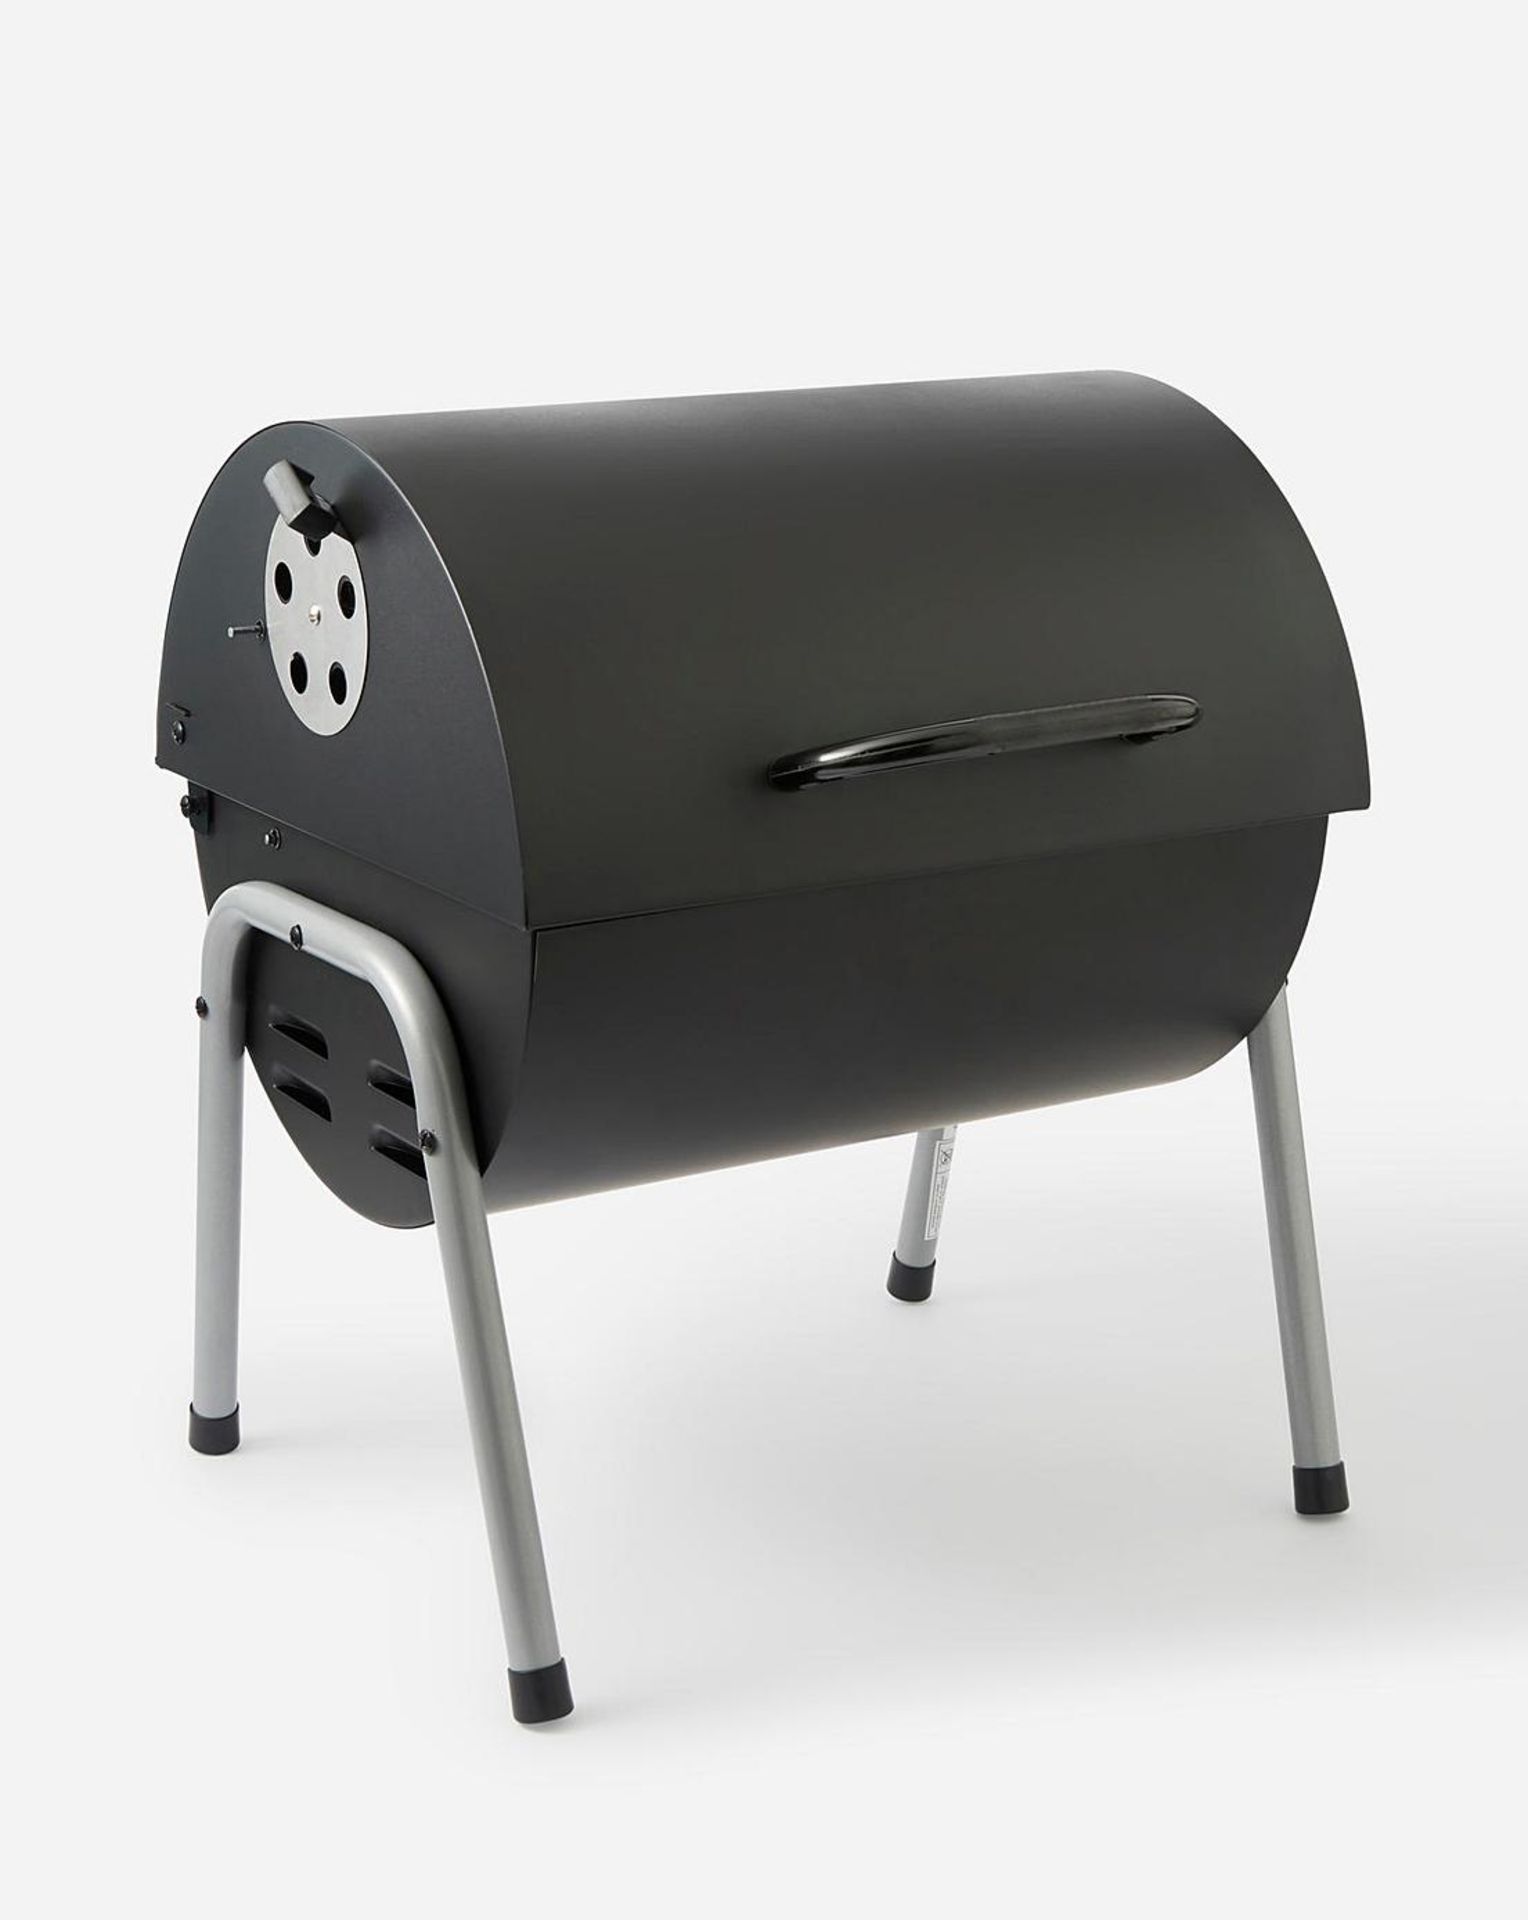 4x BRAND NEW Tabletop Oil Drum Barbeque Grill. RRP £59.99 EACH. Black steel firebowl with enamel